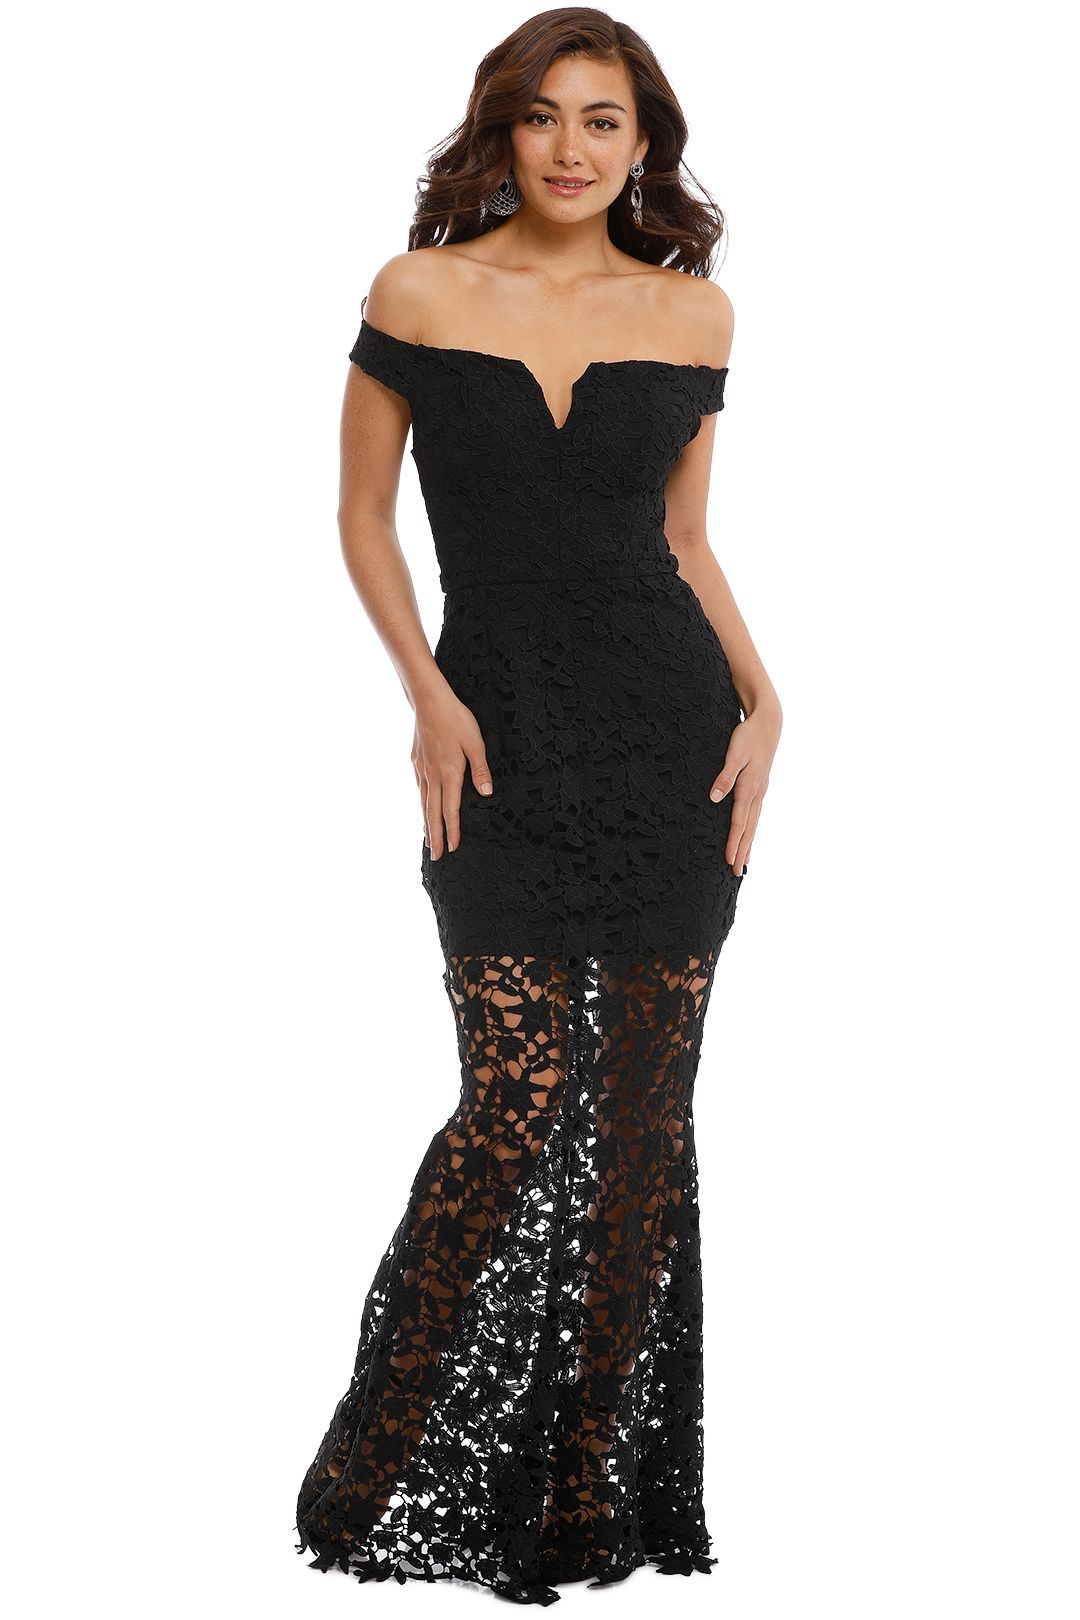 Grace and Hart - Heart Beat Gown - Black - Front